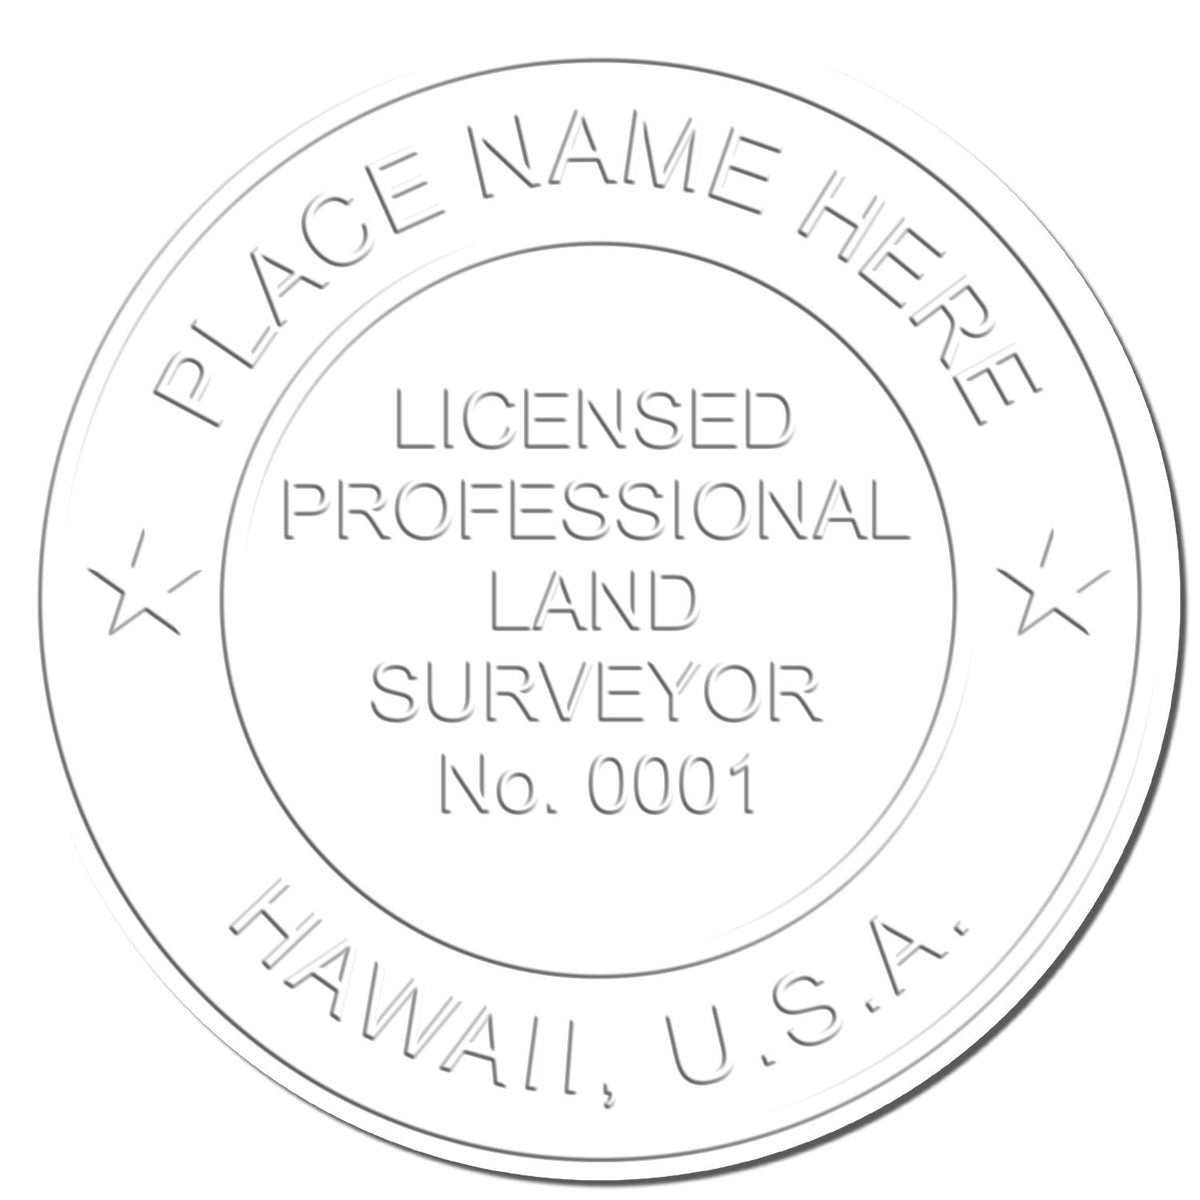 This paper is stamped with a sample imprint of the Handheld Hawaii Land Surveyor Seal, signifying its quality and reliability.